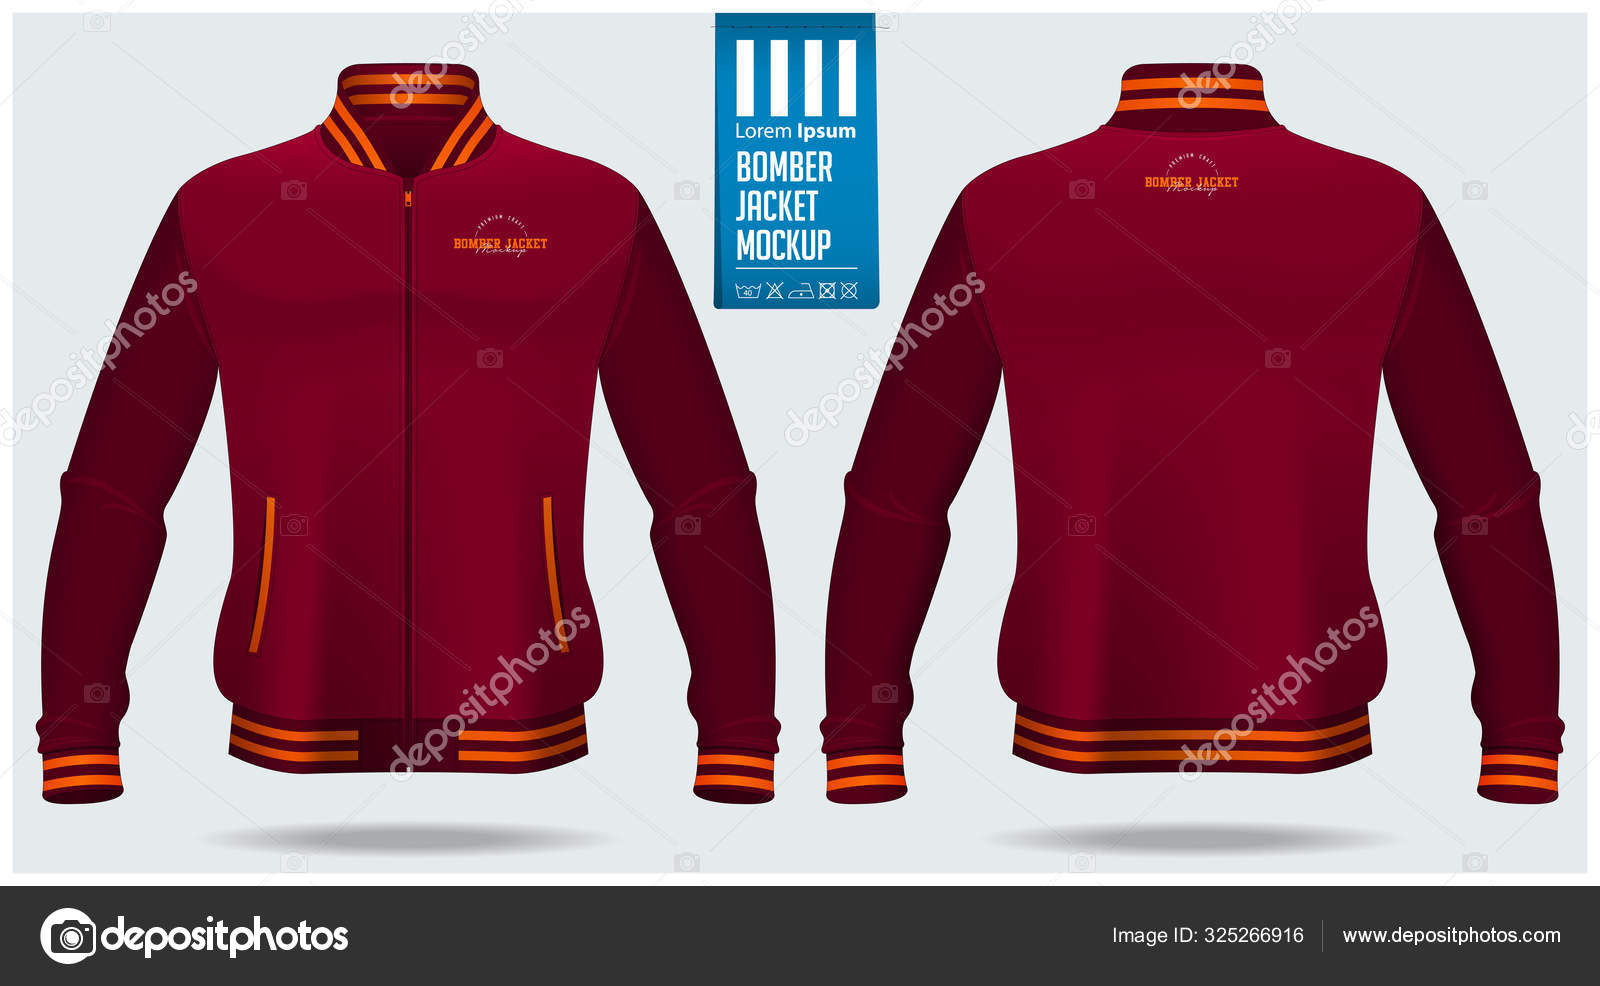 Download Zipped Bomber Jacket Mockup Template Design For Soccer Football Baseball Basketball Sports Team Or University Front View And Back View For Jacket Uniform Vector Stock Vector Royalty Free Vector Image By C Tond Ruangwit Gmail Com